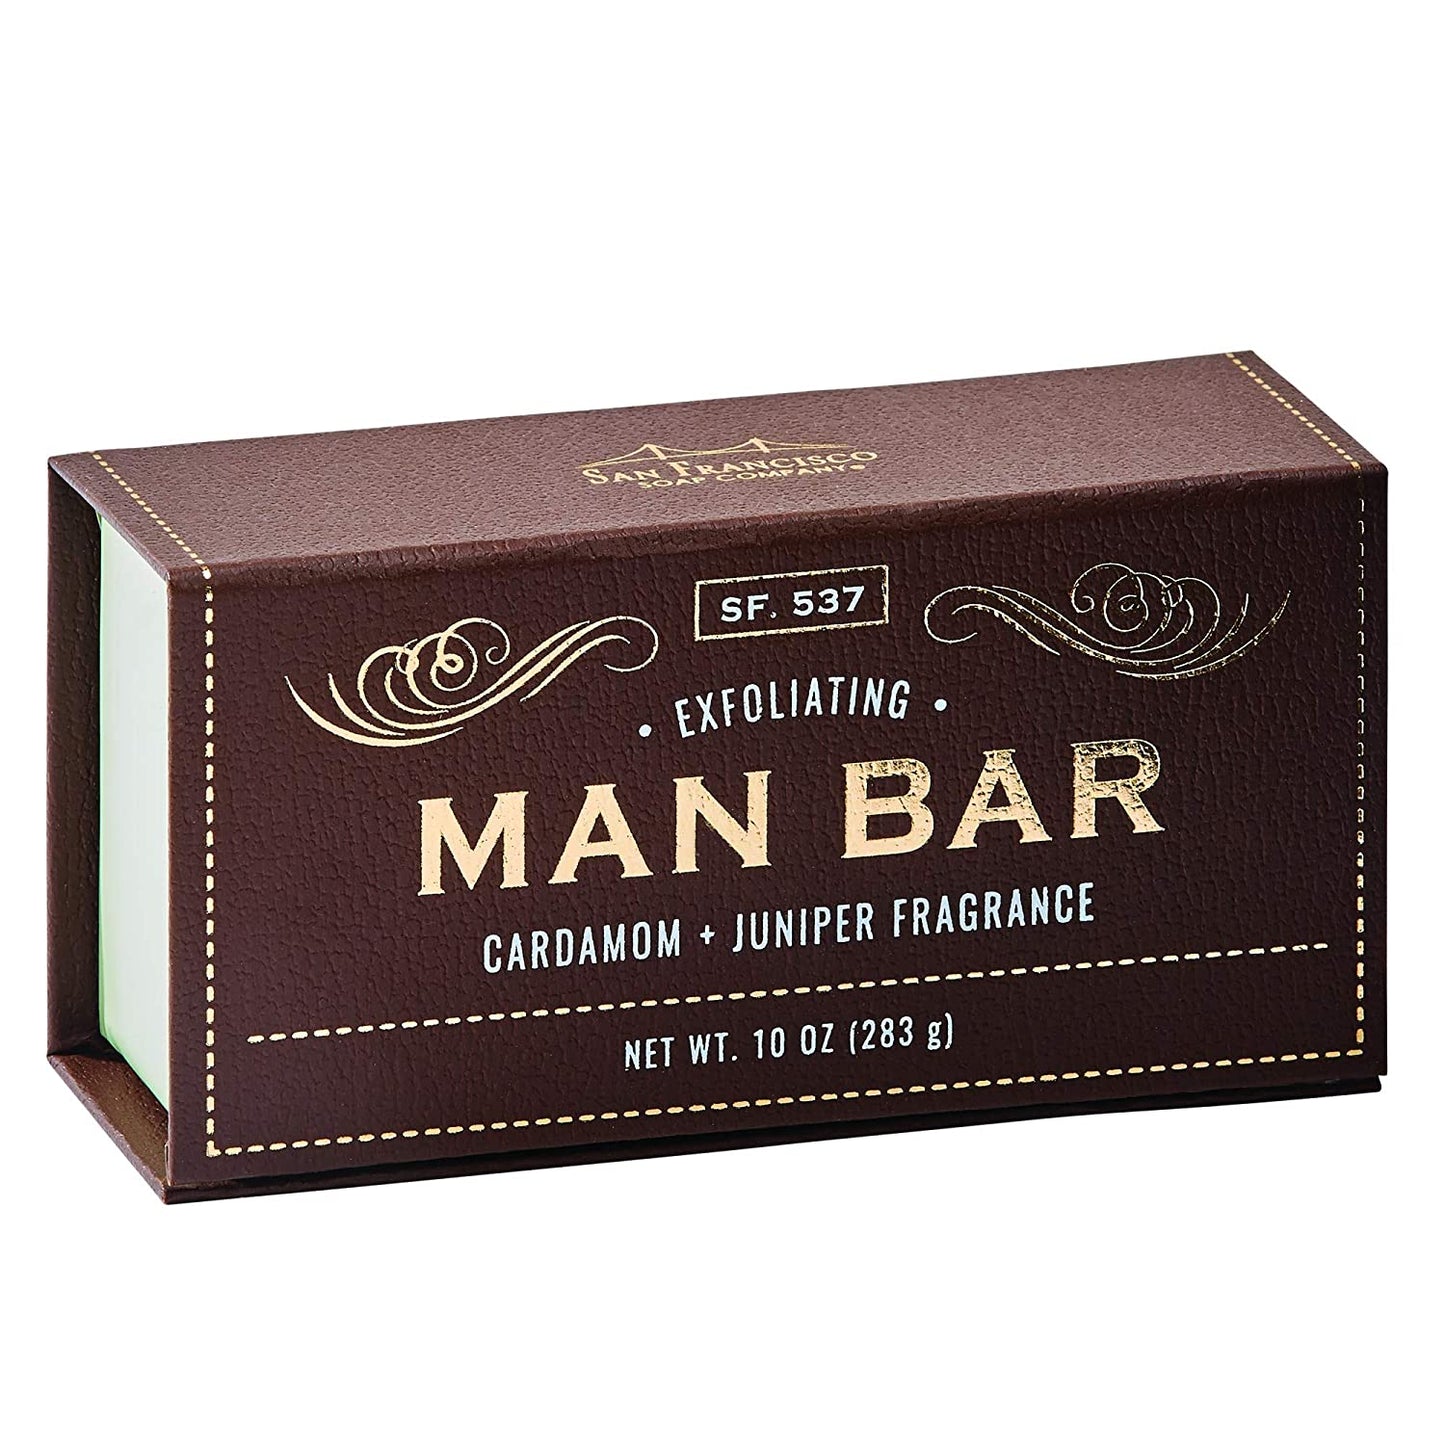 brown rectangular box of soap on white background. box has "man bar" written in gold, swirling gold graphics above text, and gold dotted line bordering the box edges.